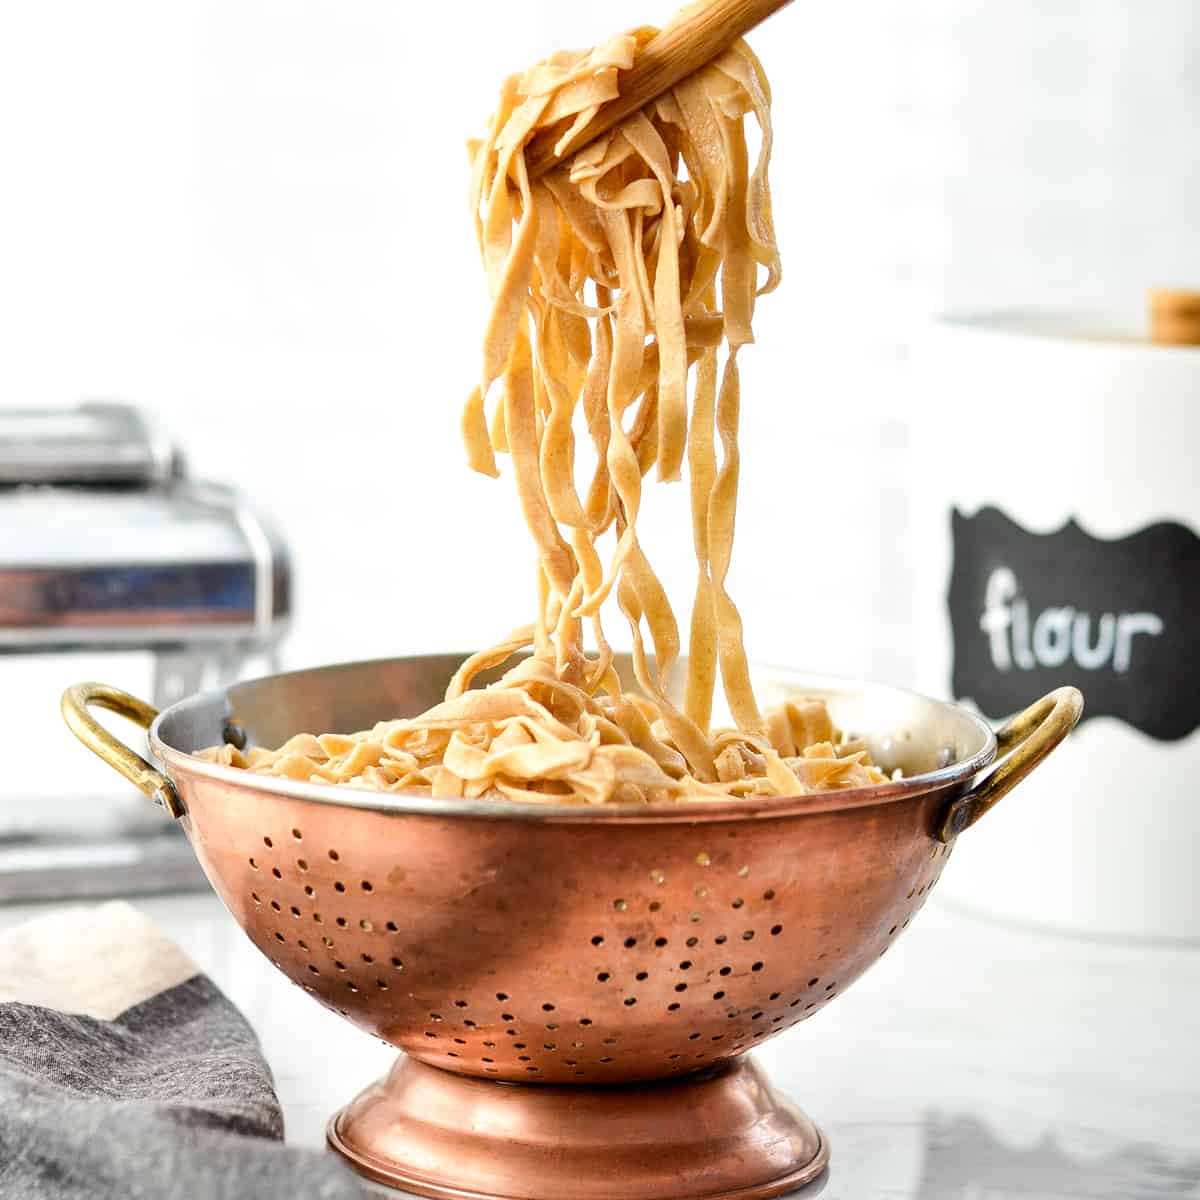 Front view of cooked Homemade Whole Wheat Pasta being pulled out of a colander with wooden tongs